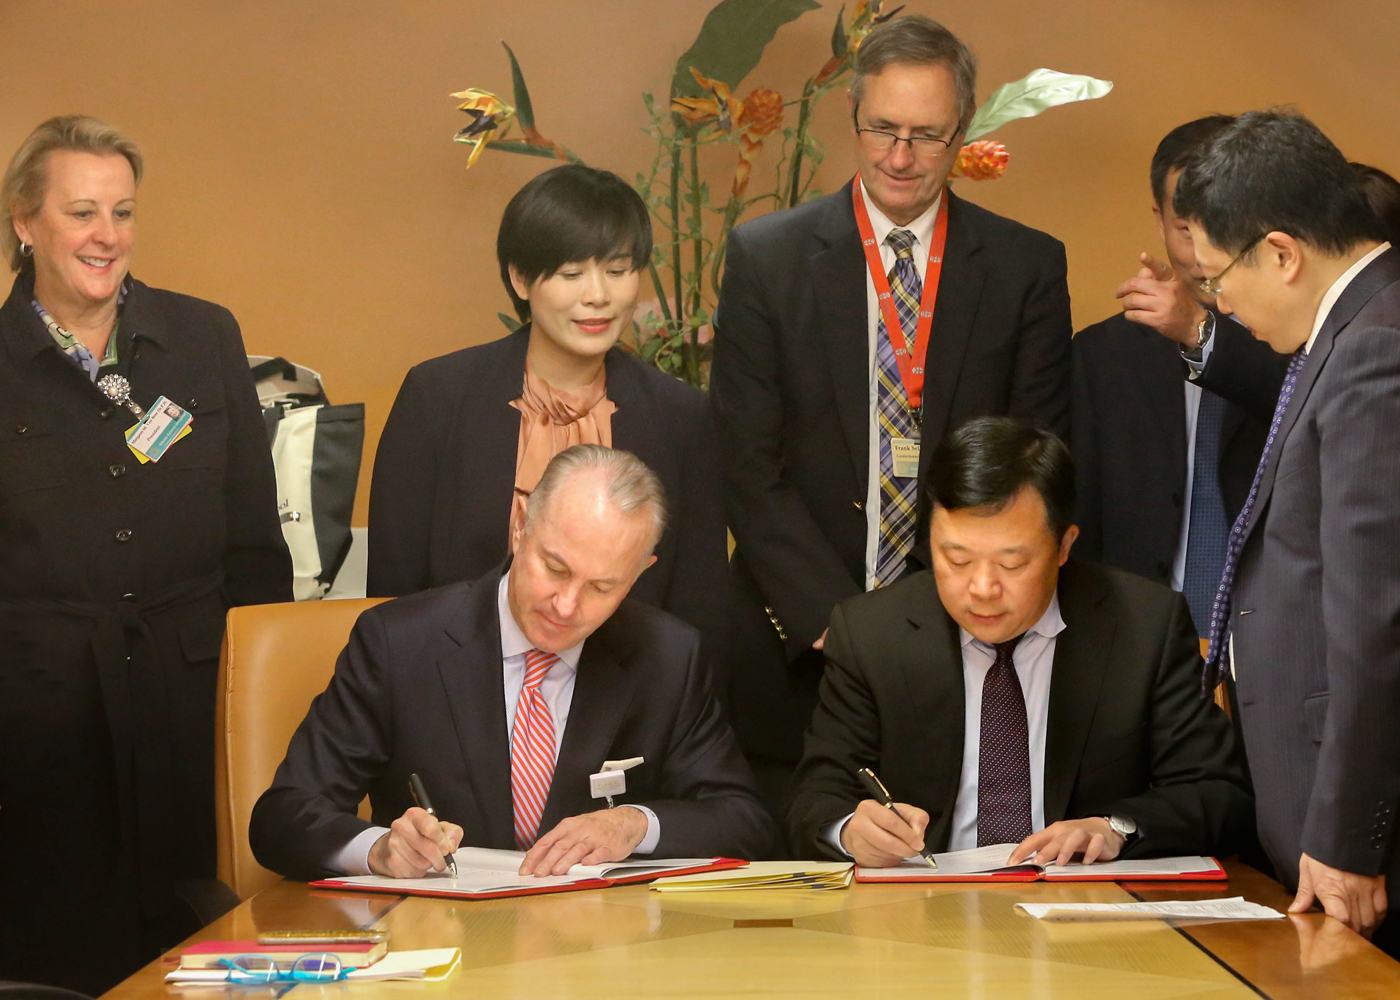 Leaders from Lifespan and Wuhan Union Hospital gather to sign an agreement